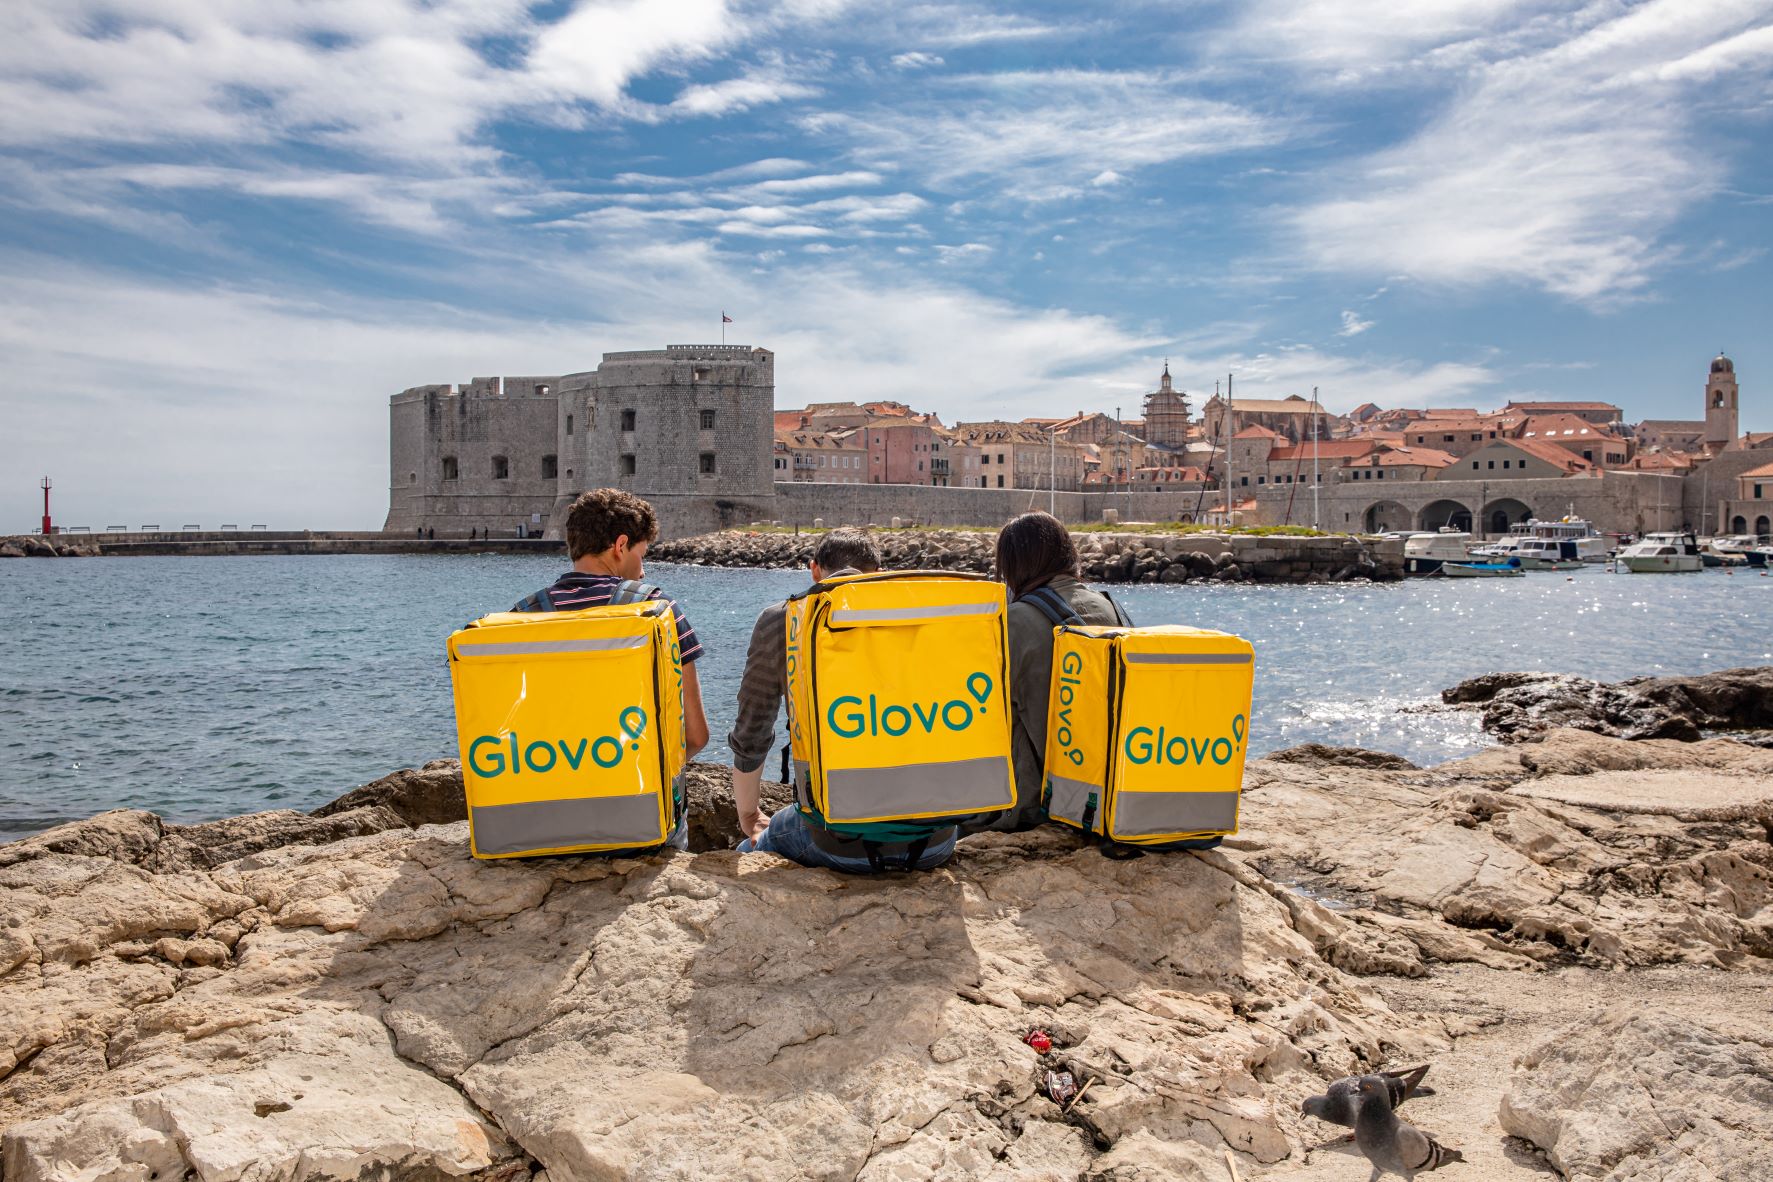 Food delivery platform more and more popular in Croatia this summer